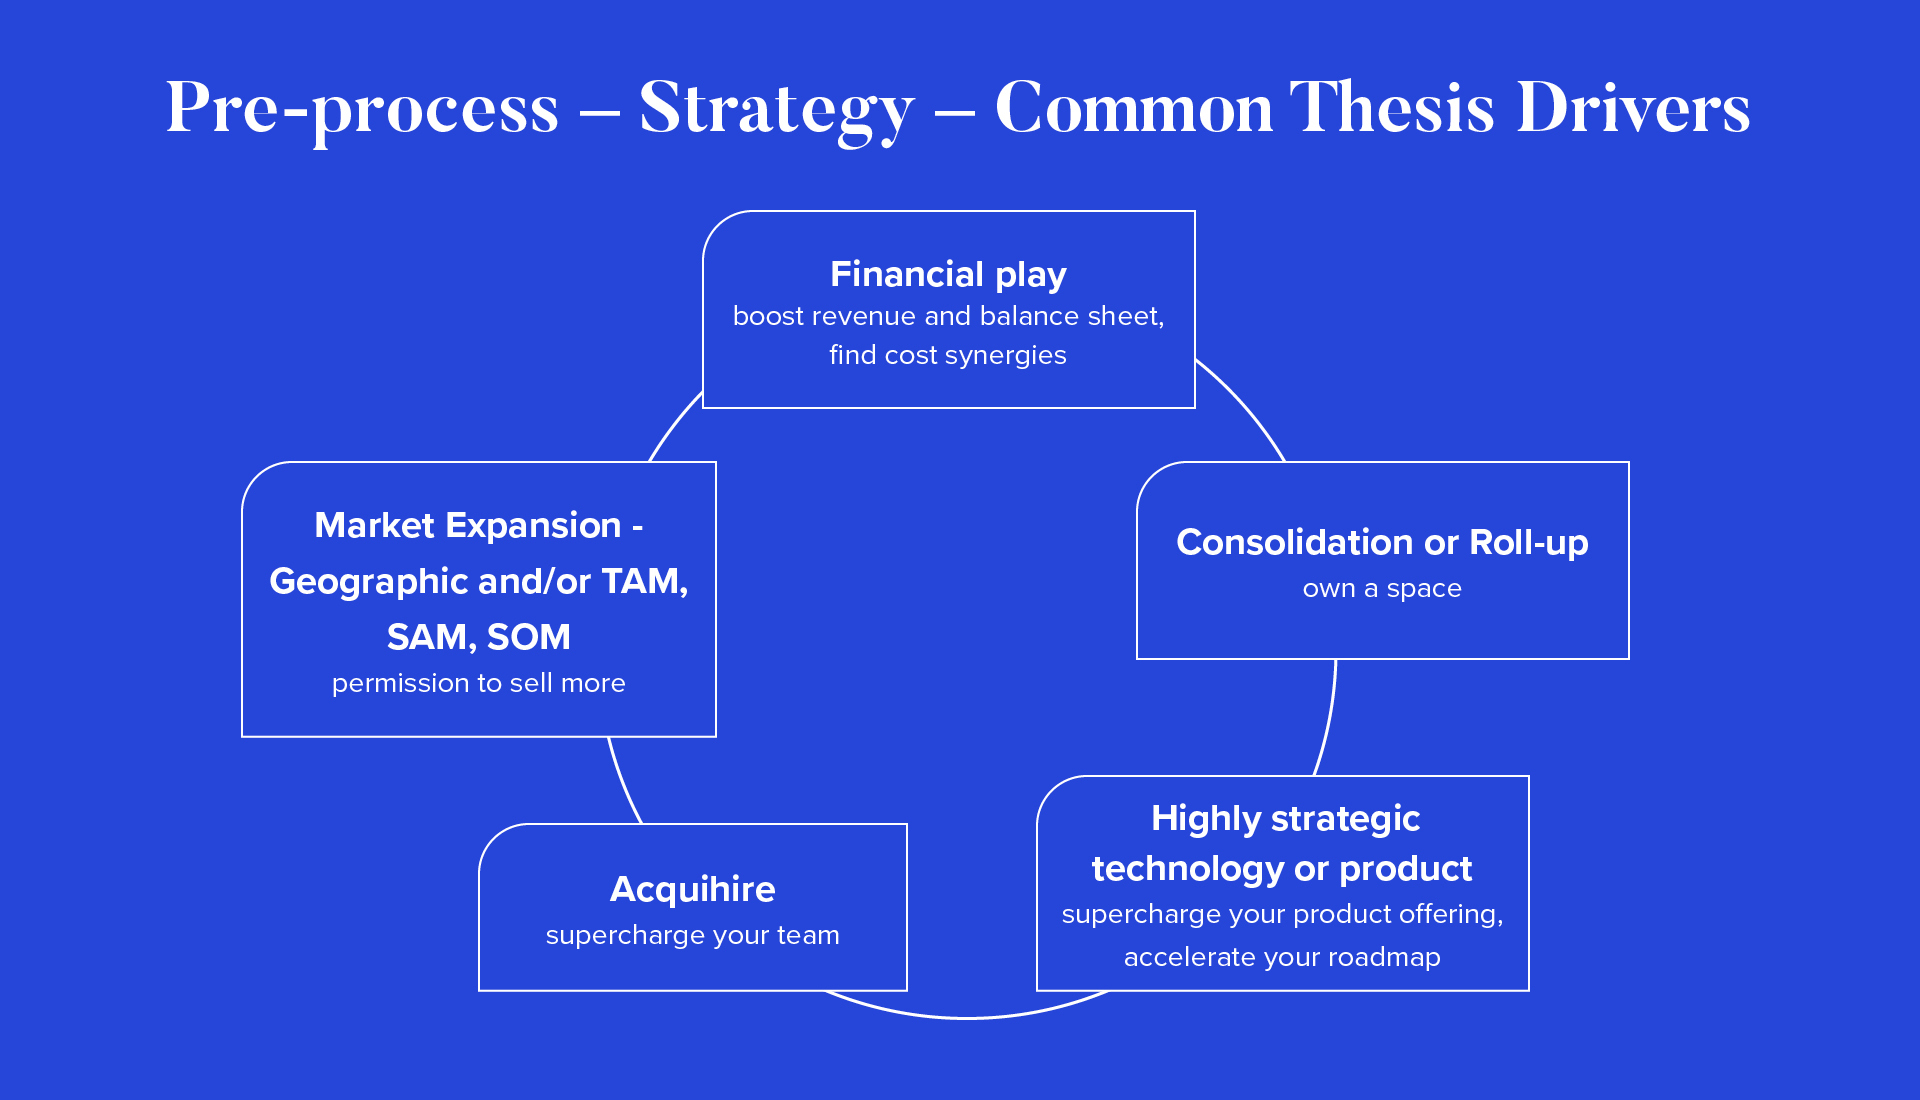 Pre-process - Strategy - Common Thesis Drivers: financial play, consolidation or roll-up, highly strategic technology or product, acquihire, market expansion - geographic and/or TAM, SAM, SOM 
